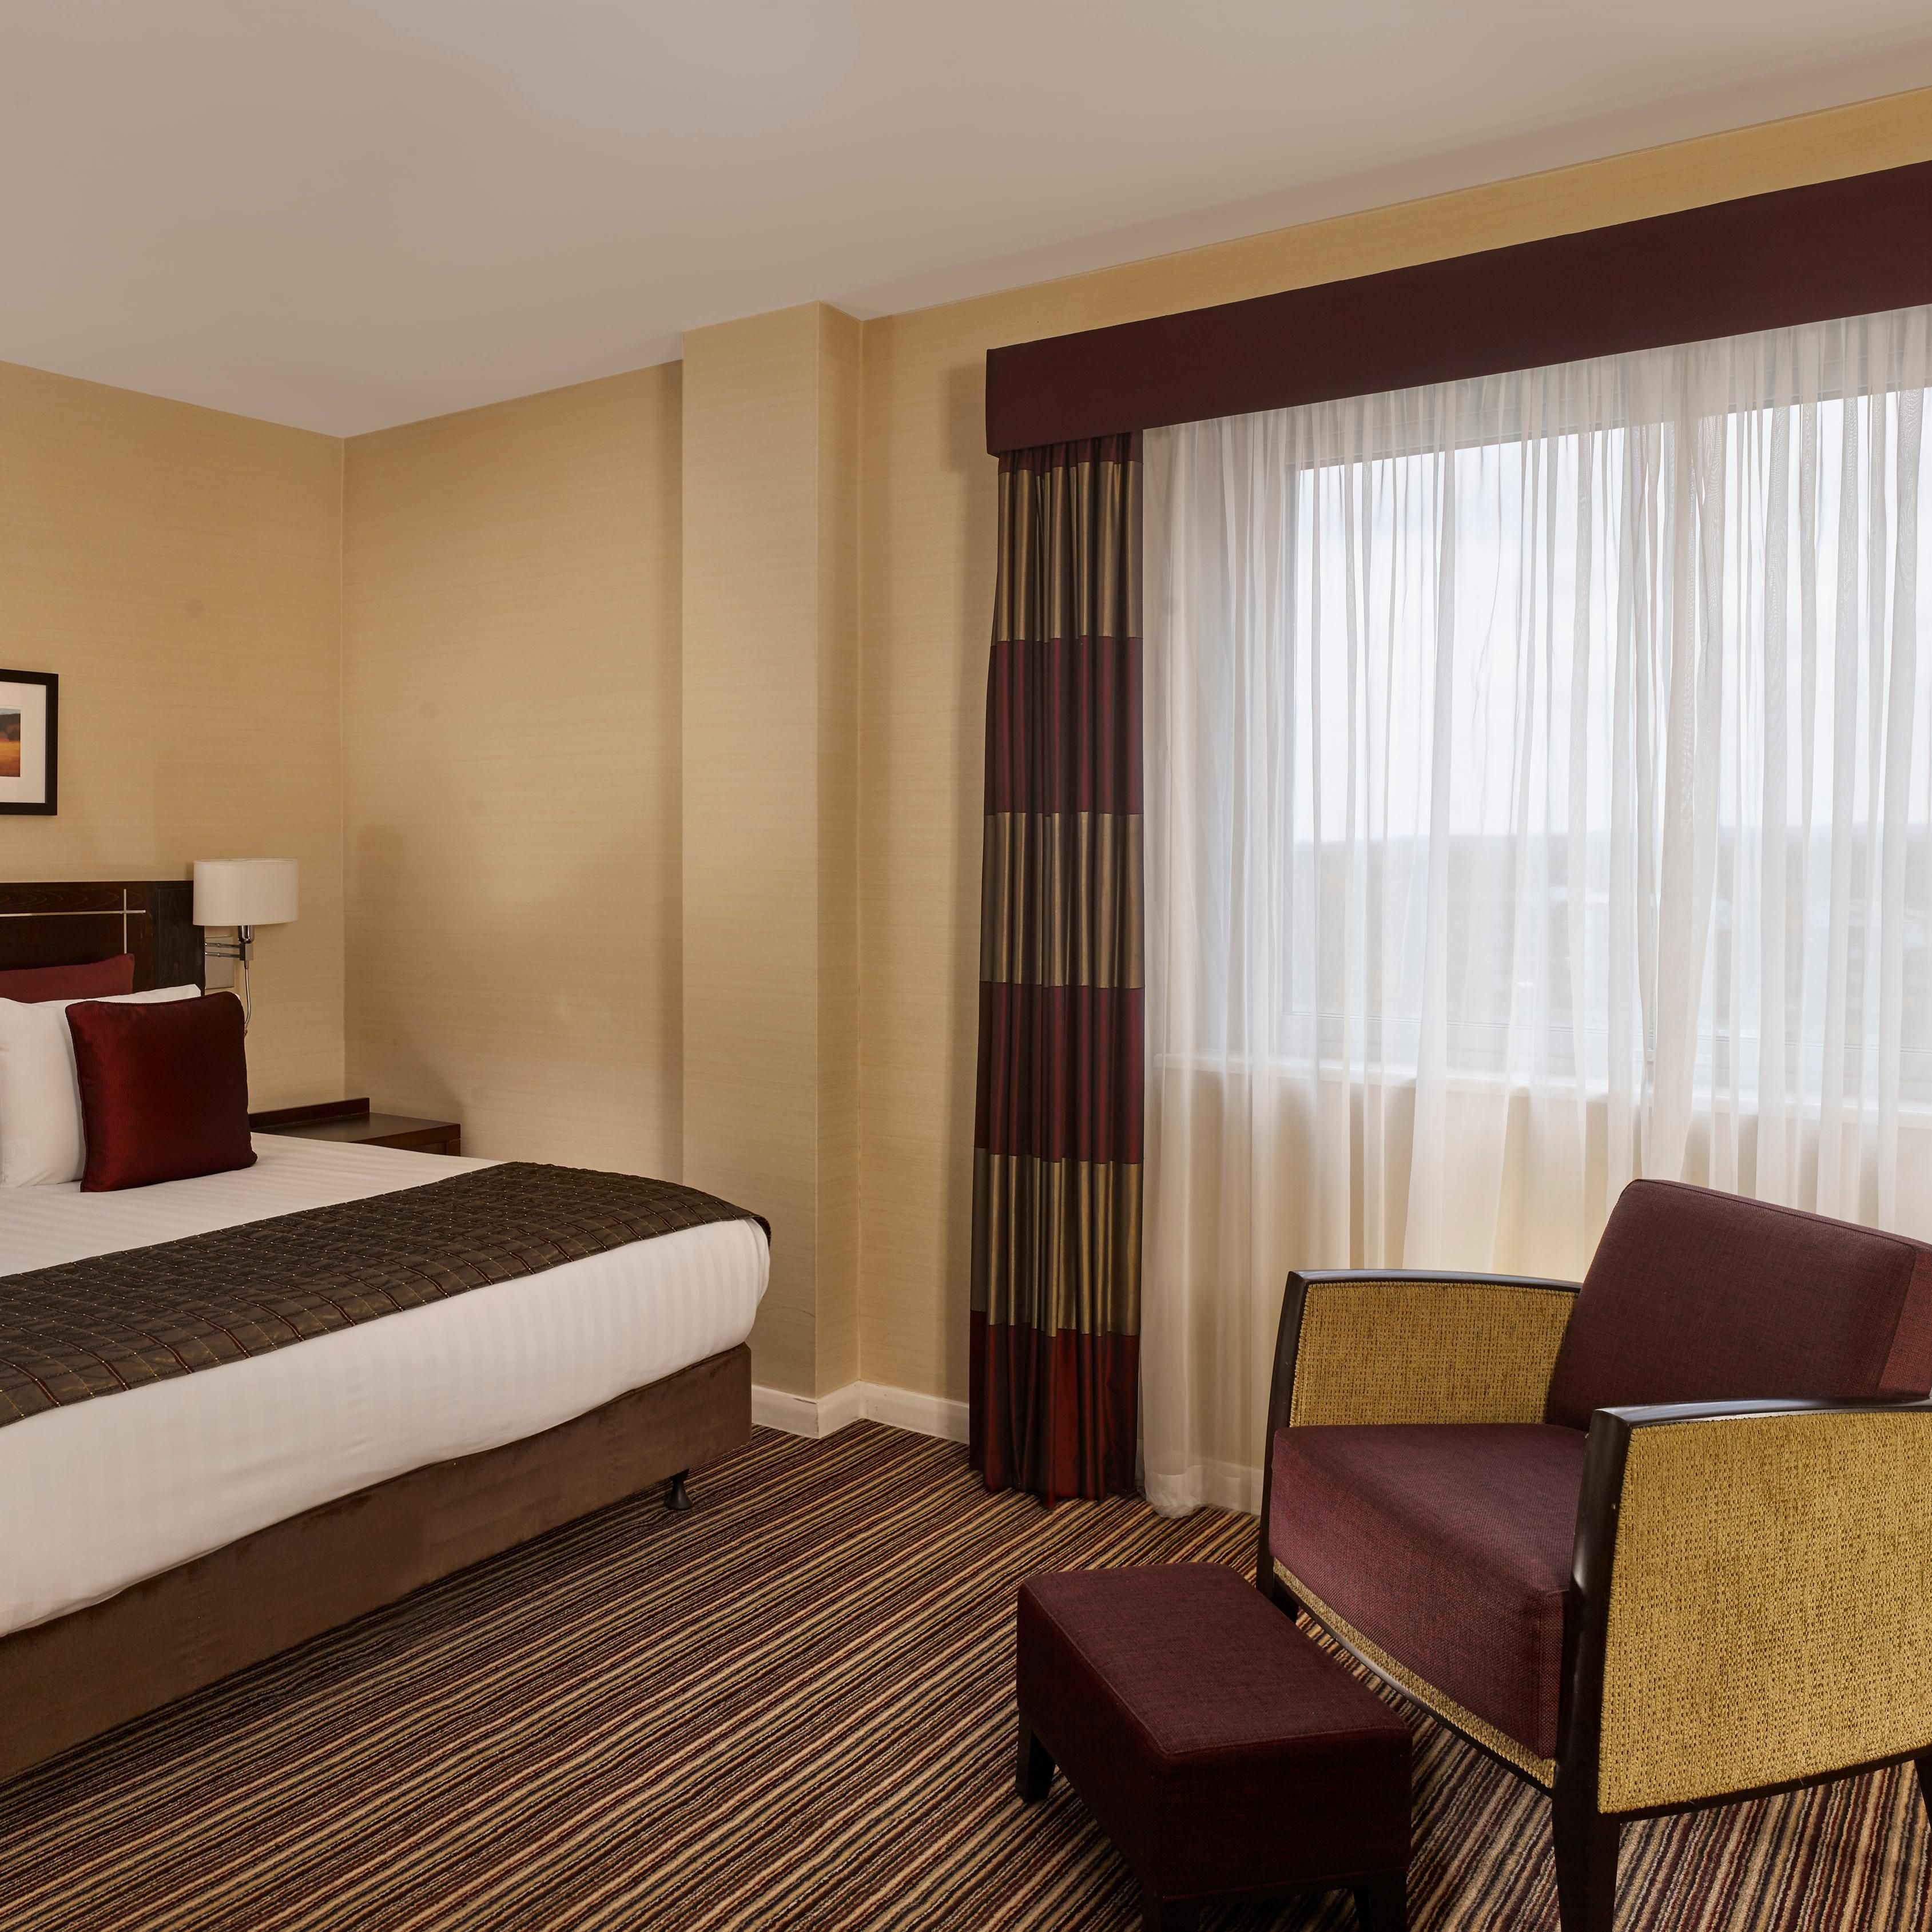 Superior Queen bedded rooms, offering even more space and comfort